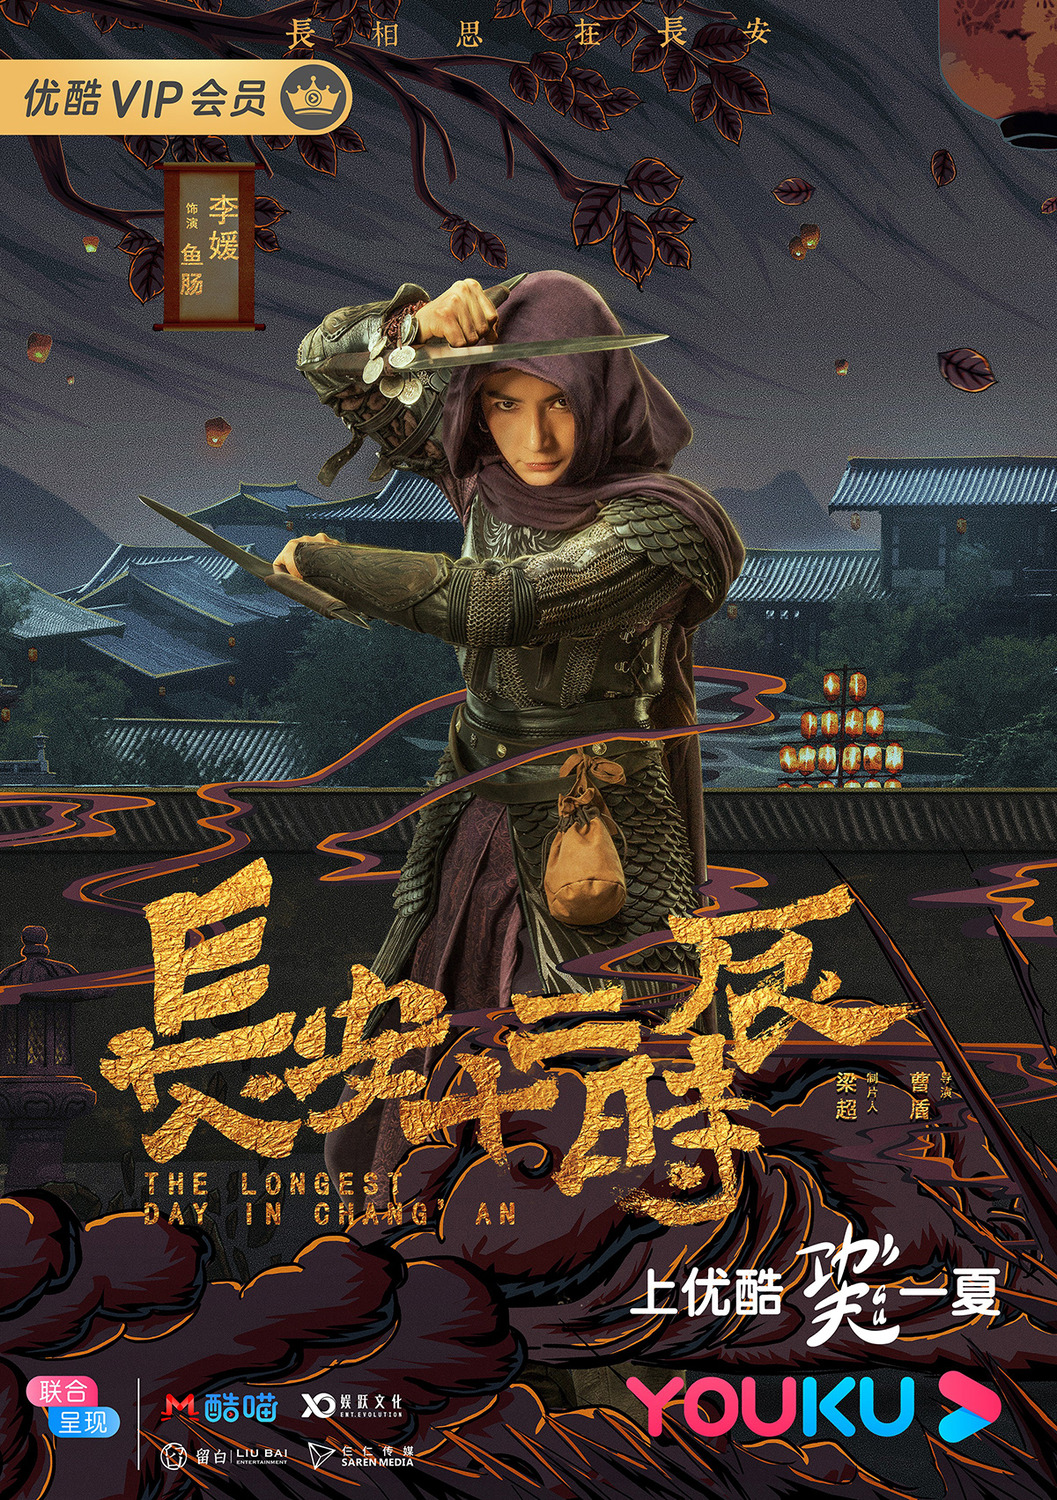 Extra Large TV Poster Image for Chang'an shi er shi chen (#6 of 18)